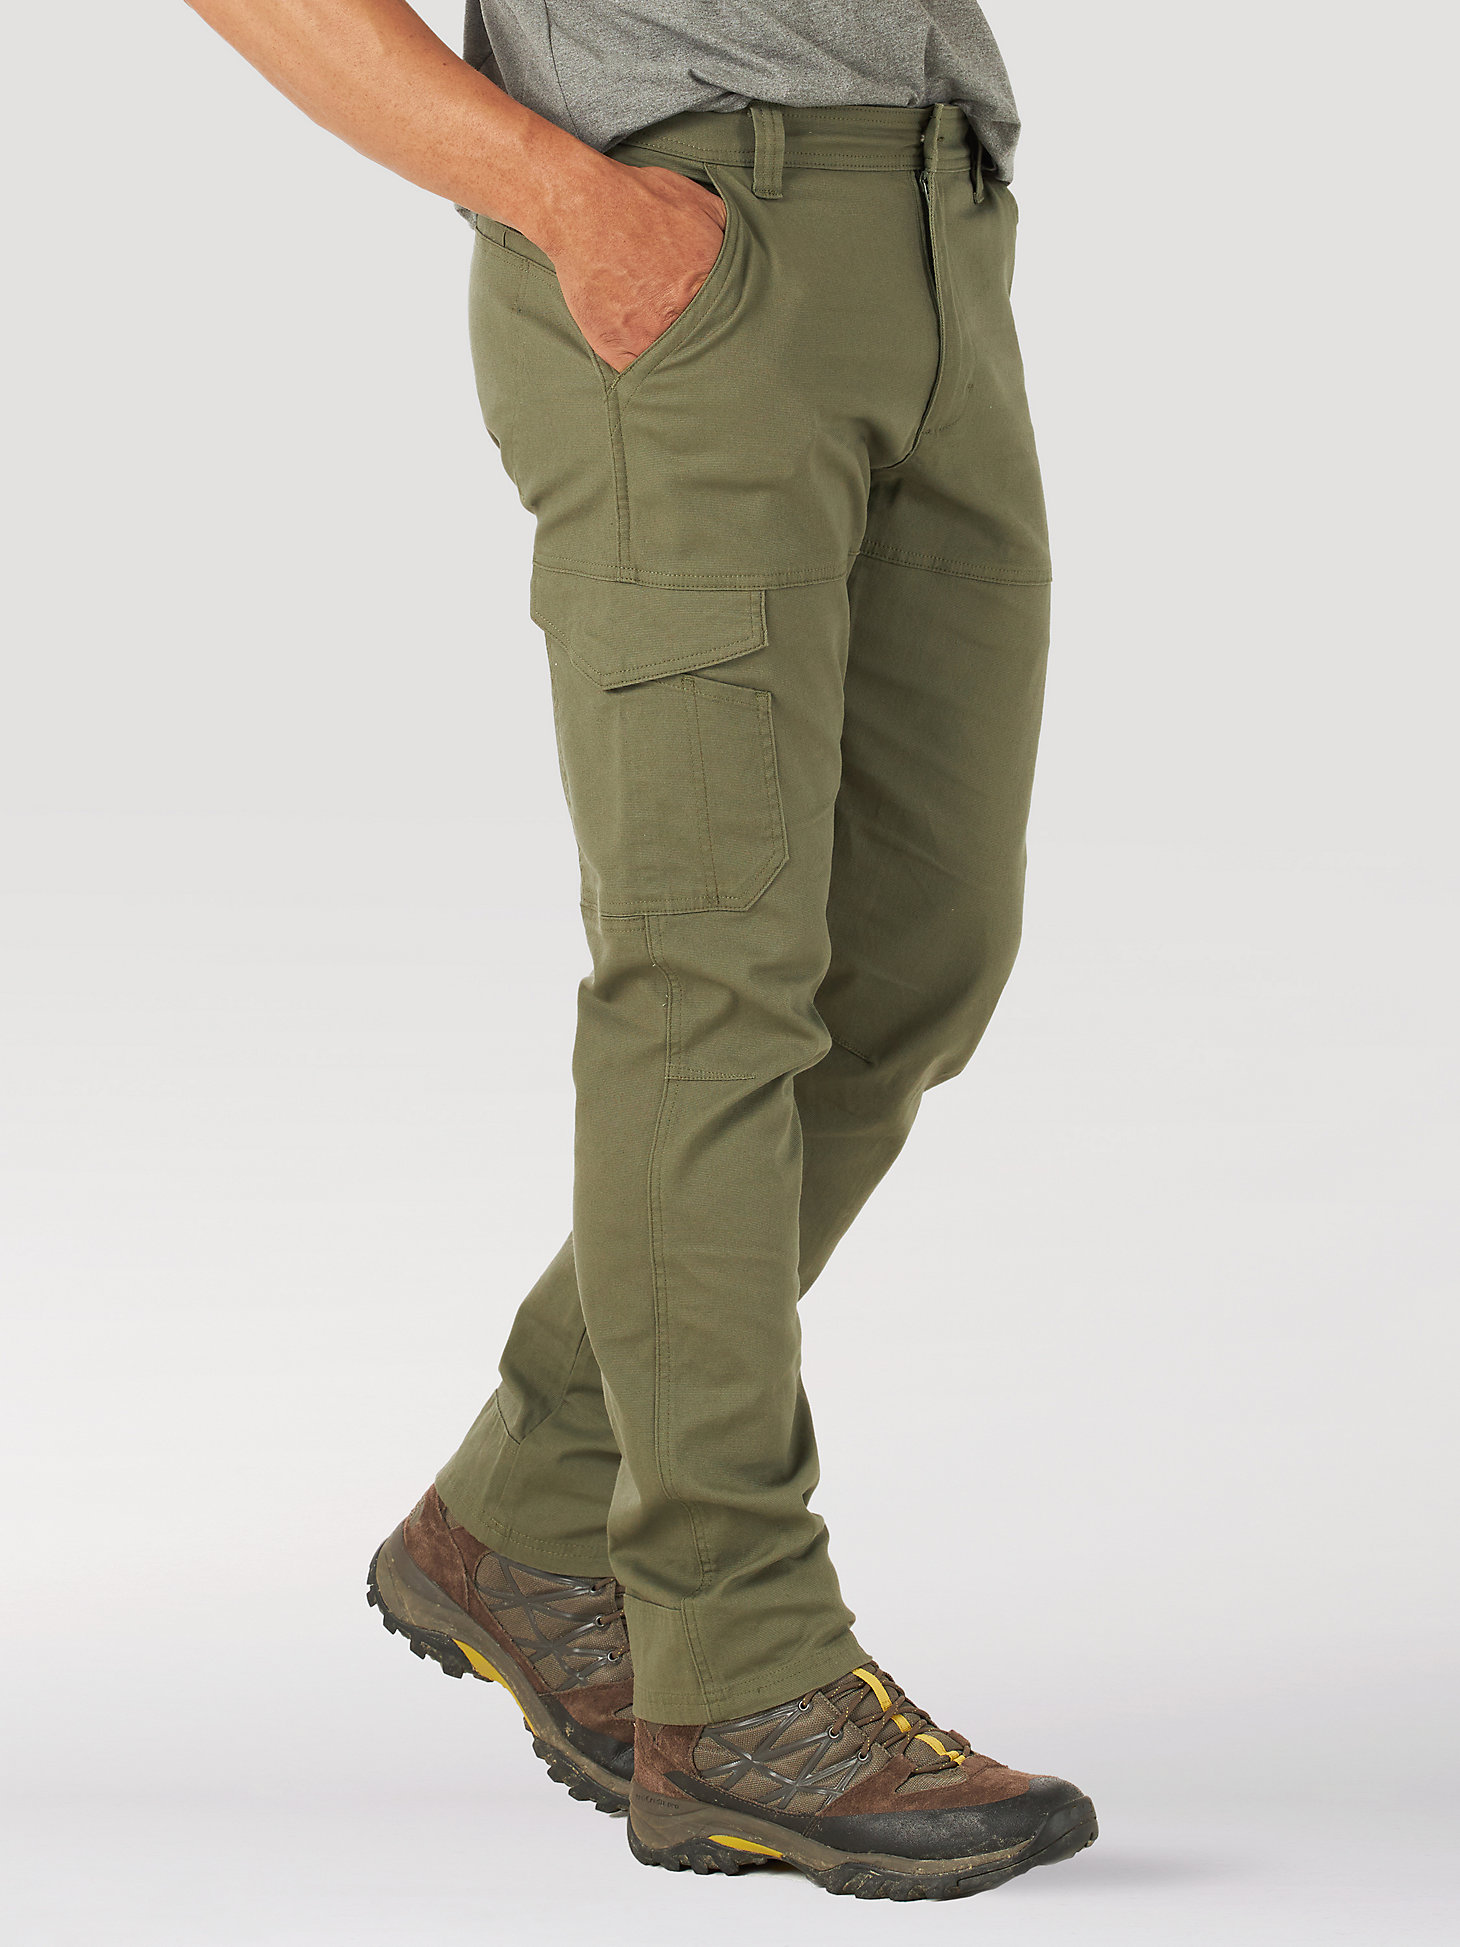 ATG by Wrangler™ Men's Canvas Cargo Pant in Industrial Green alternative view 2